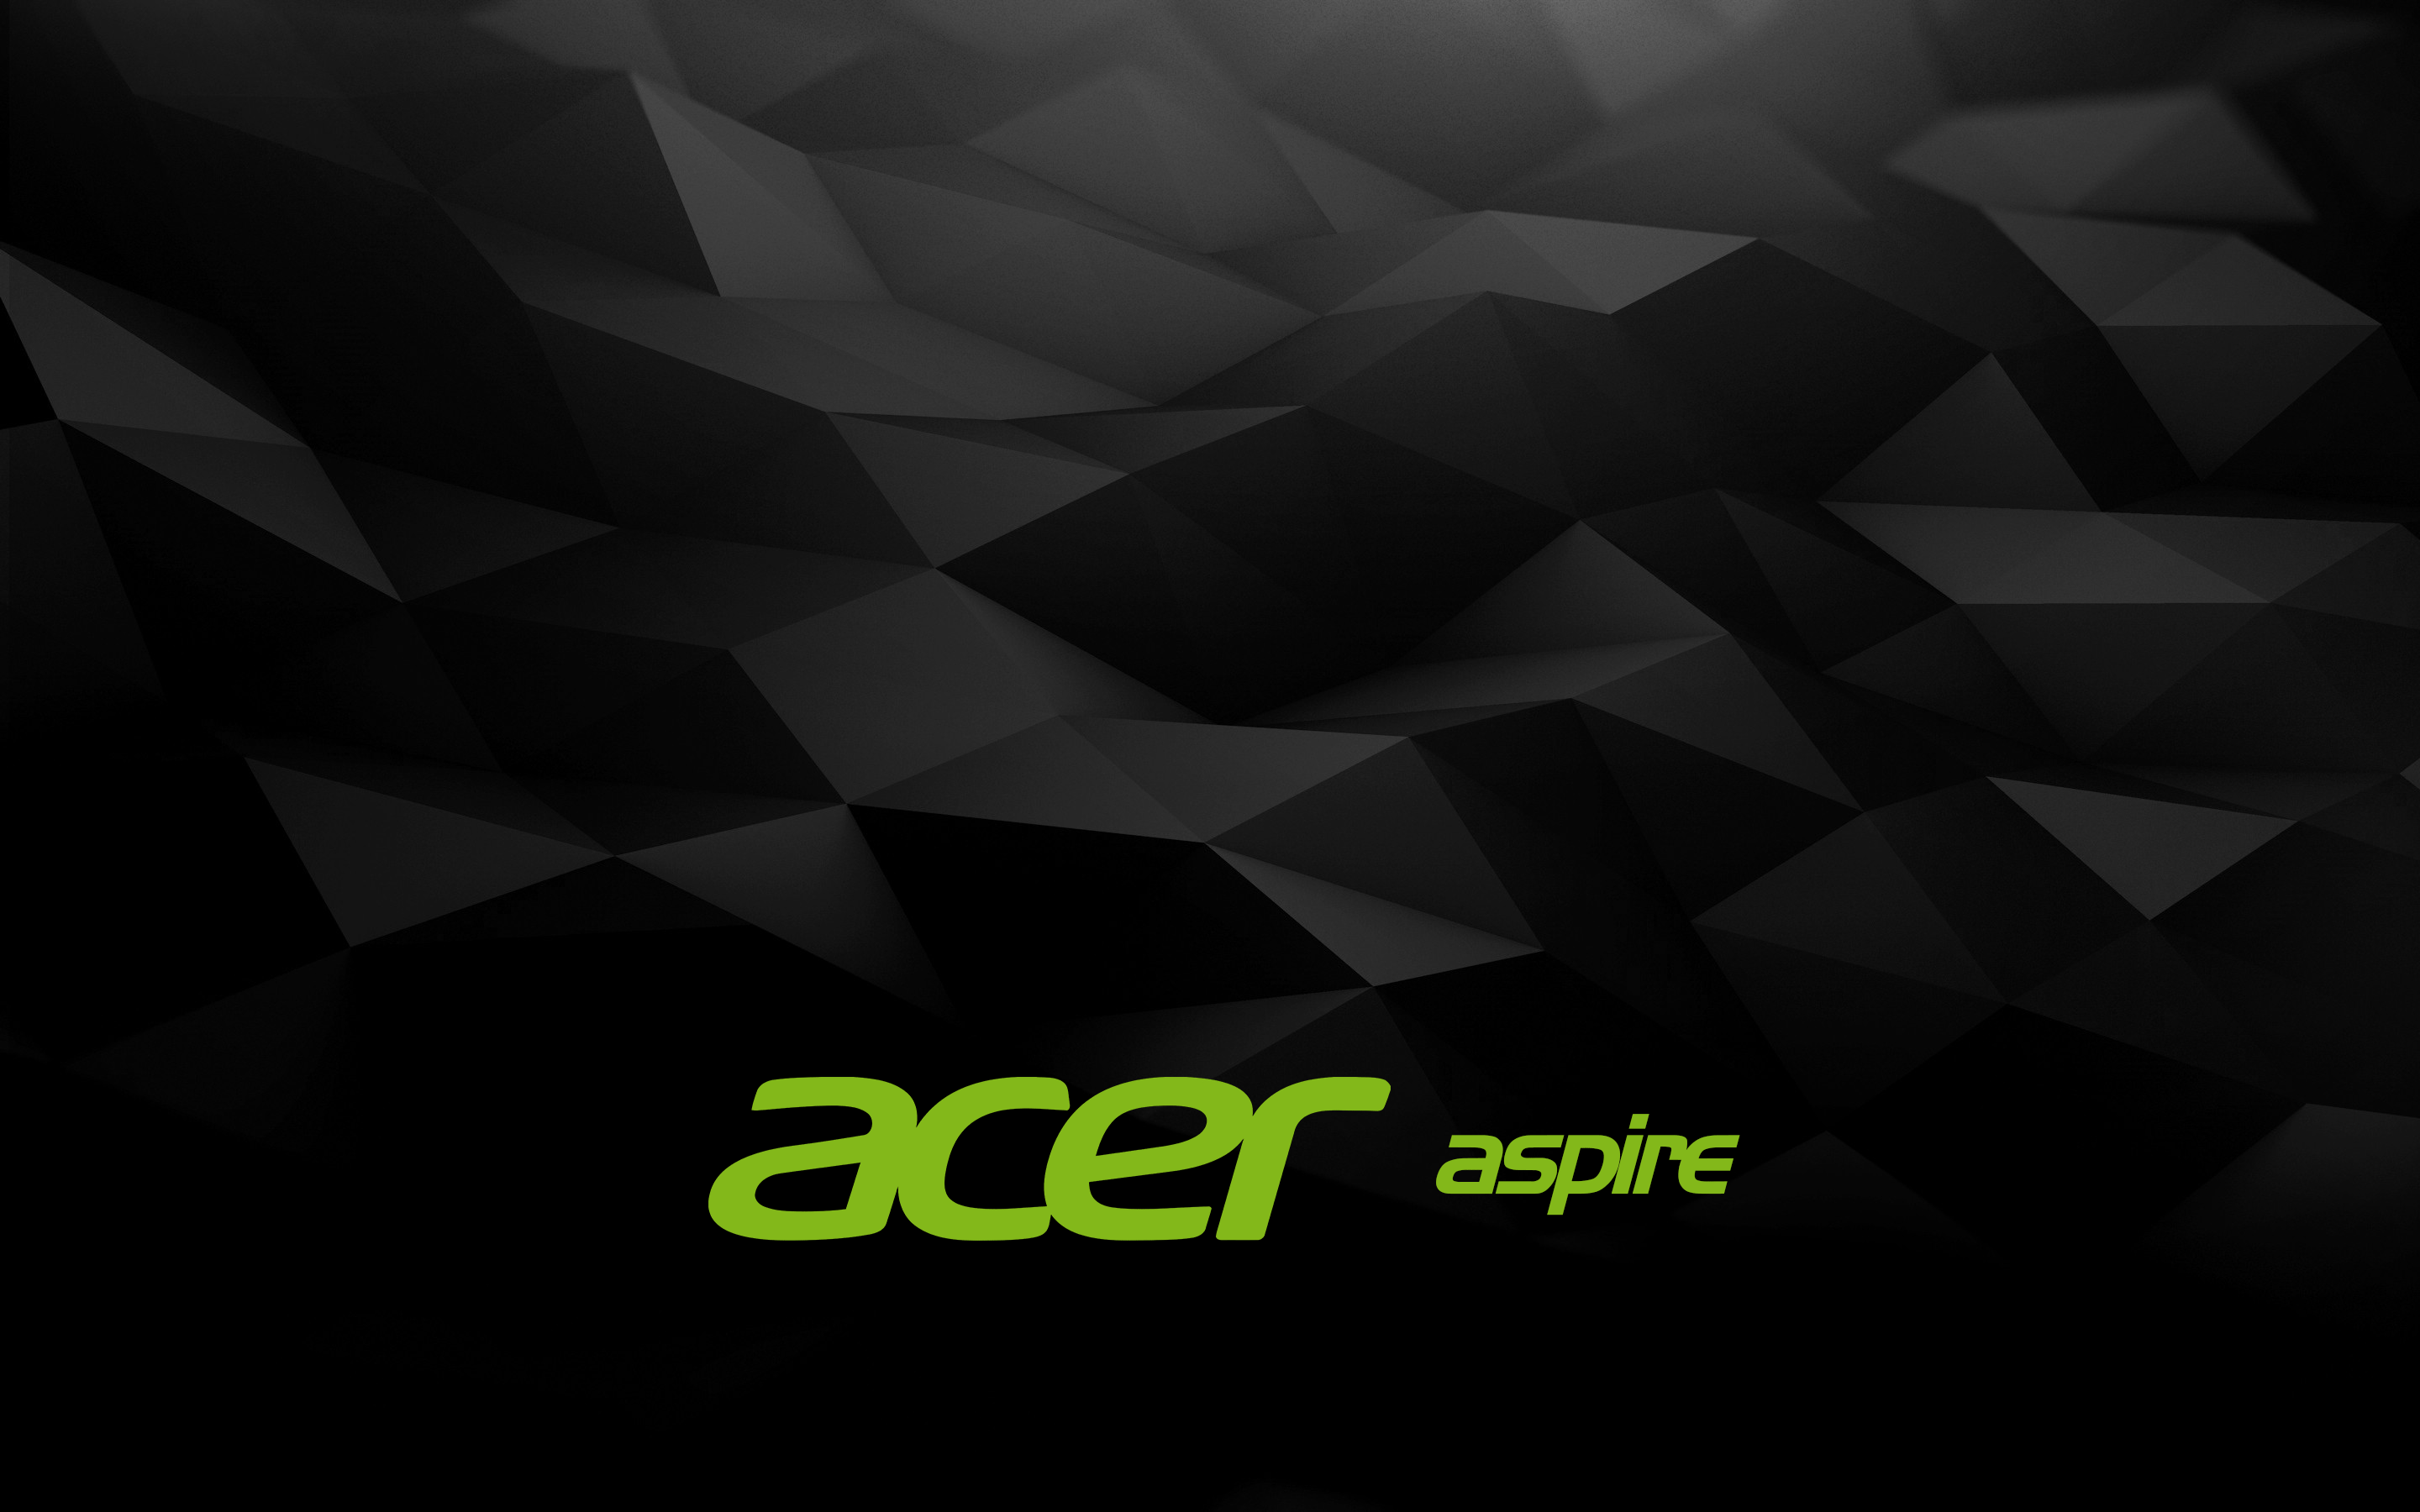 Acer Aspire 5 Wallpapers Top Free Acer Aspire 5 Backgrounds Wallpaperaccess